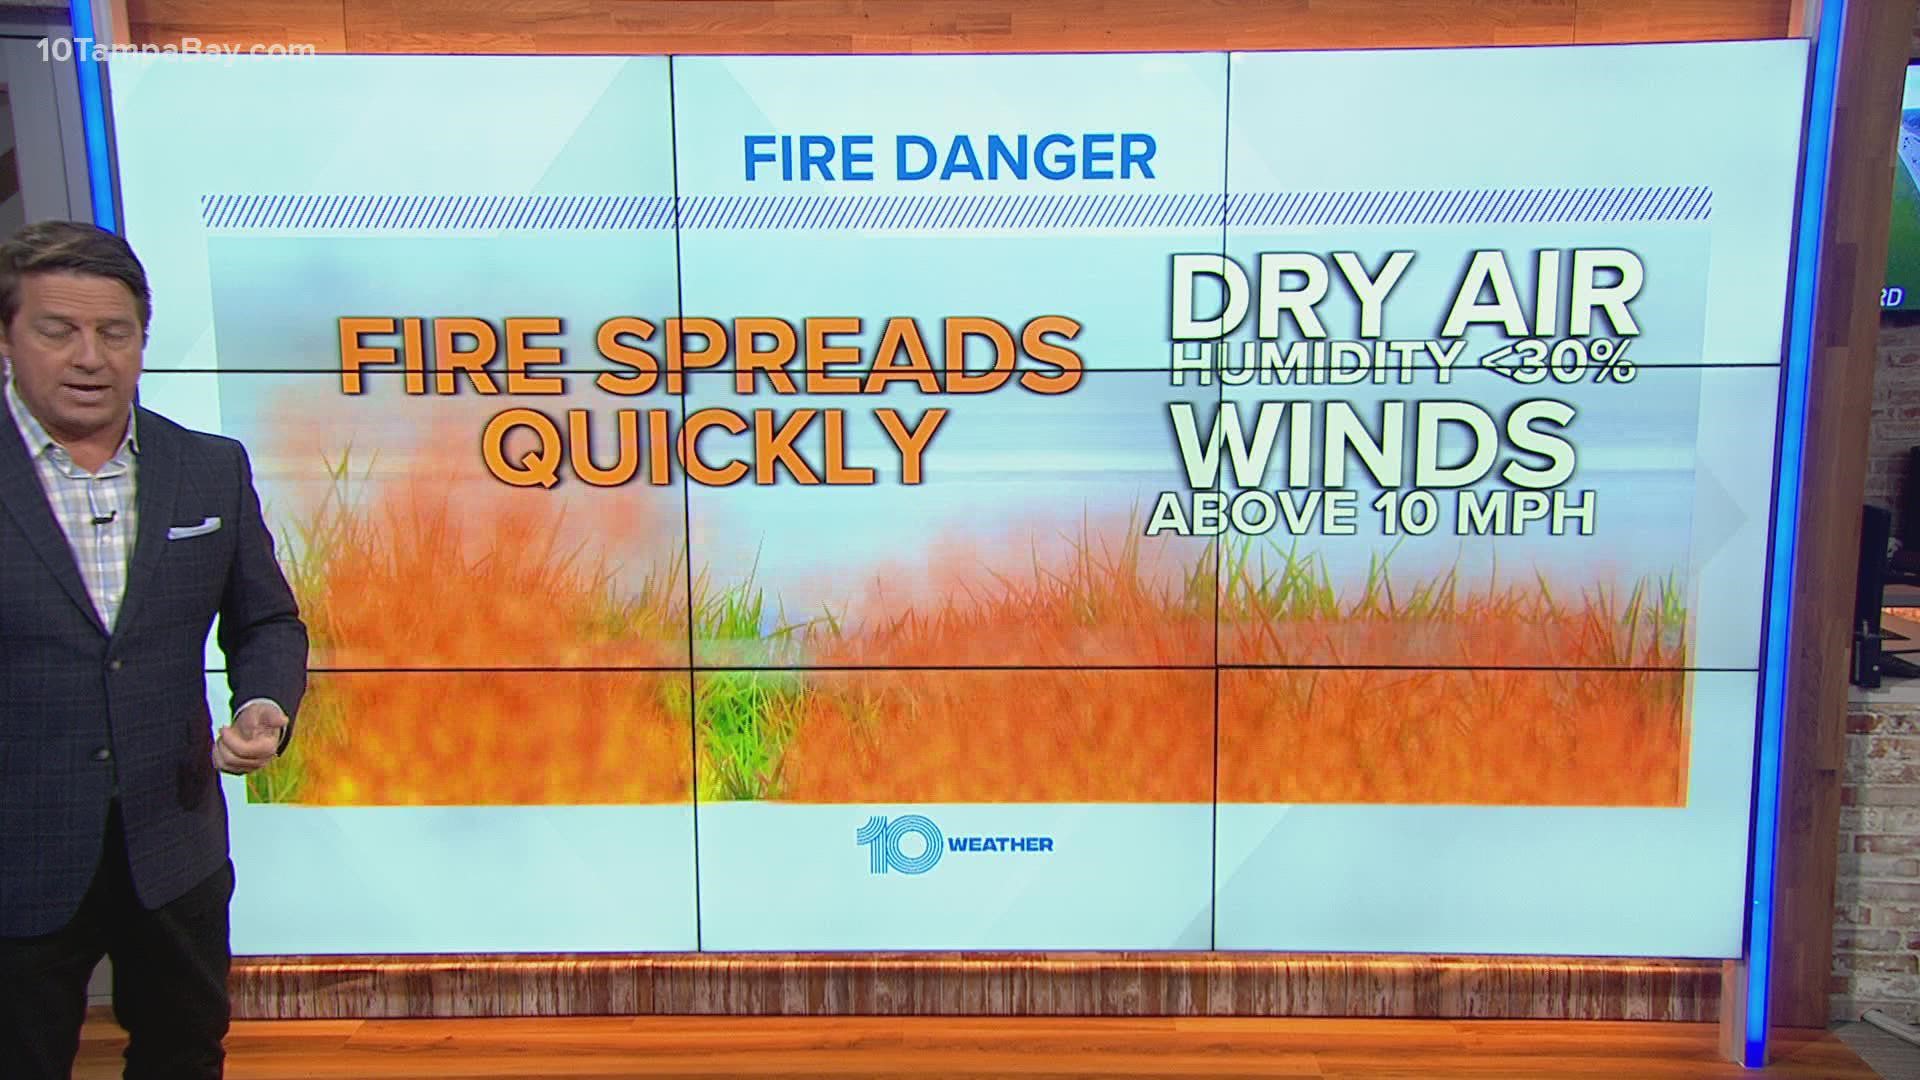 Outdoor burning is highly discouraged.